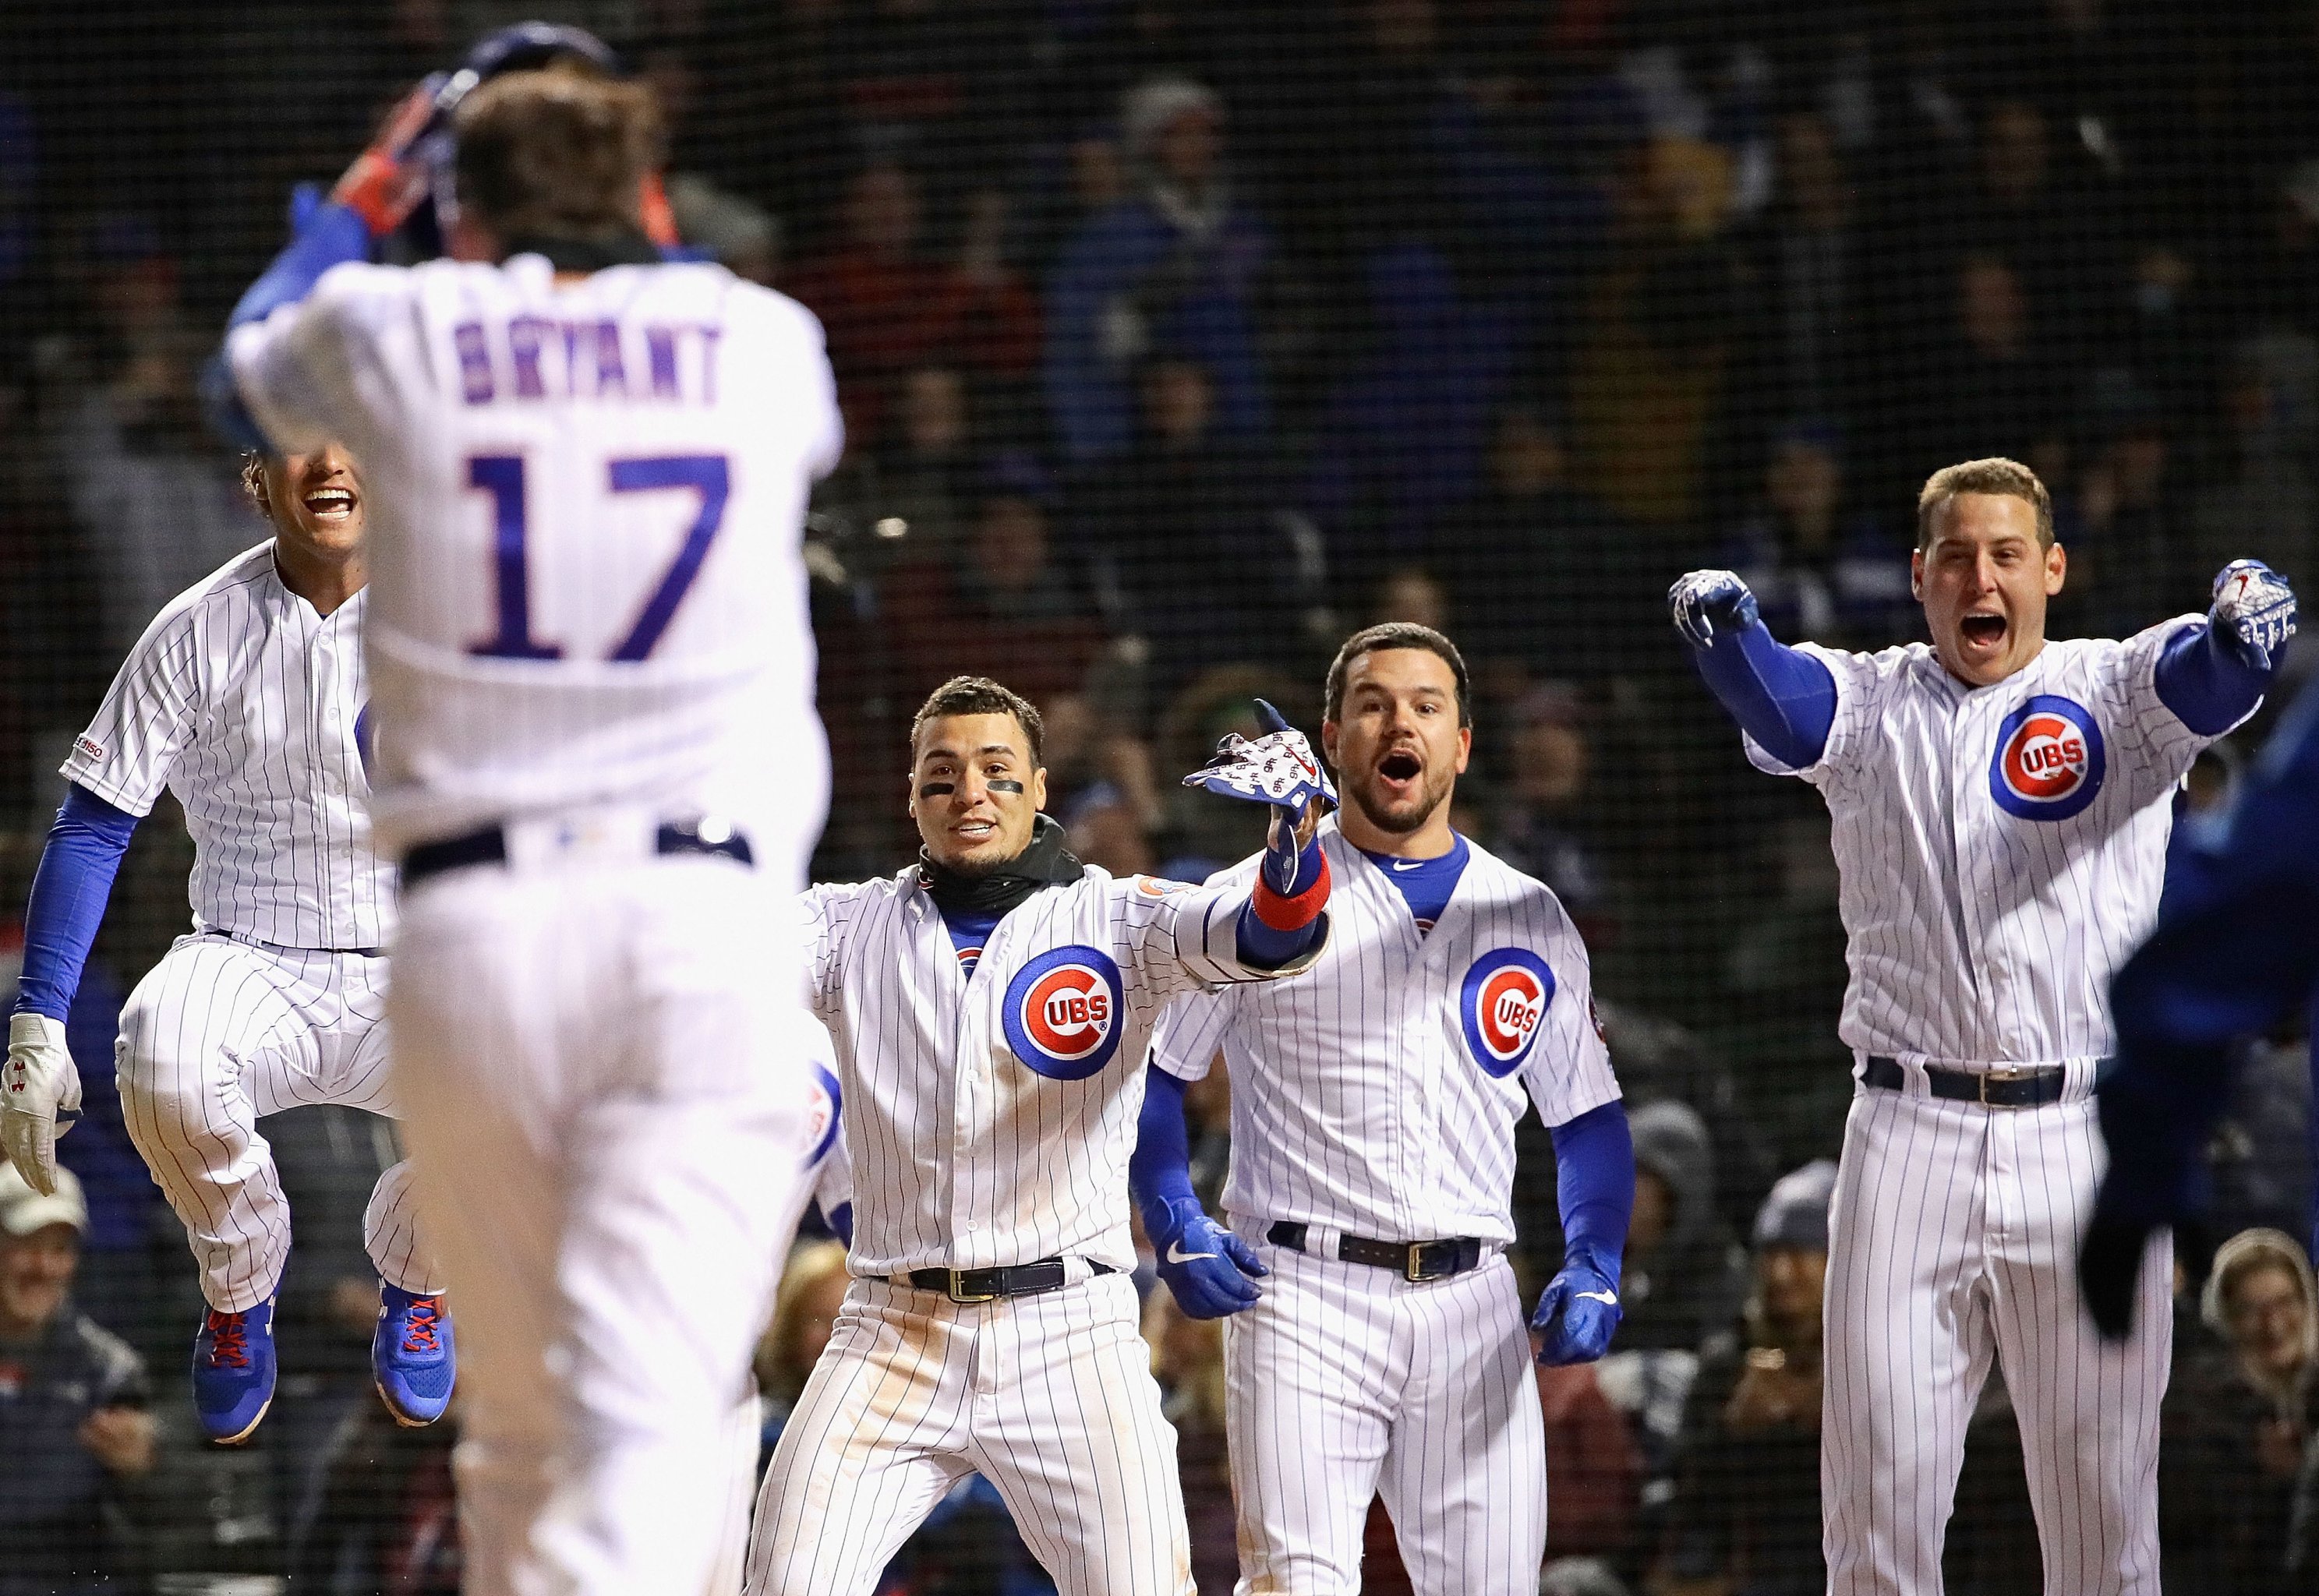 Mired in early World Series slump, Cubs' Kris Bryant back in MVP